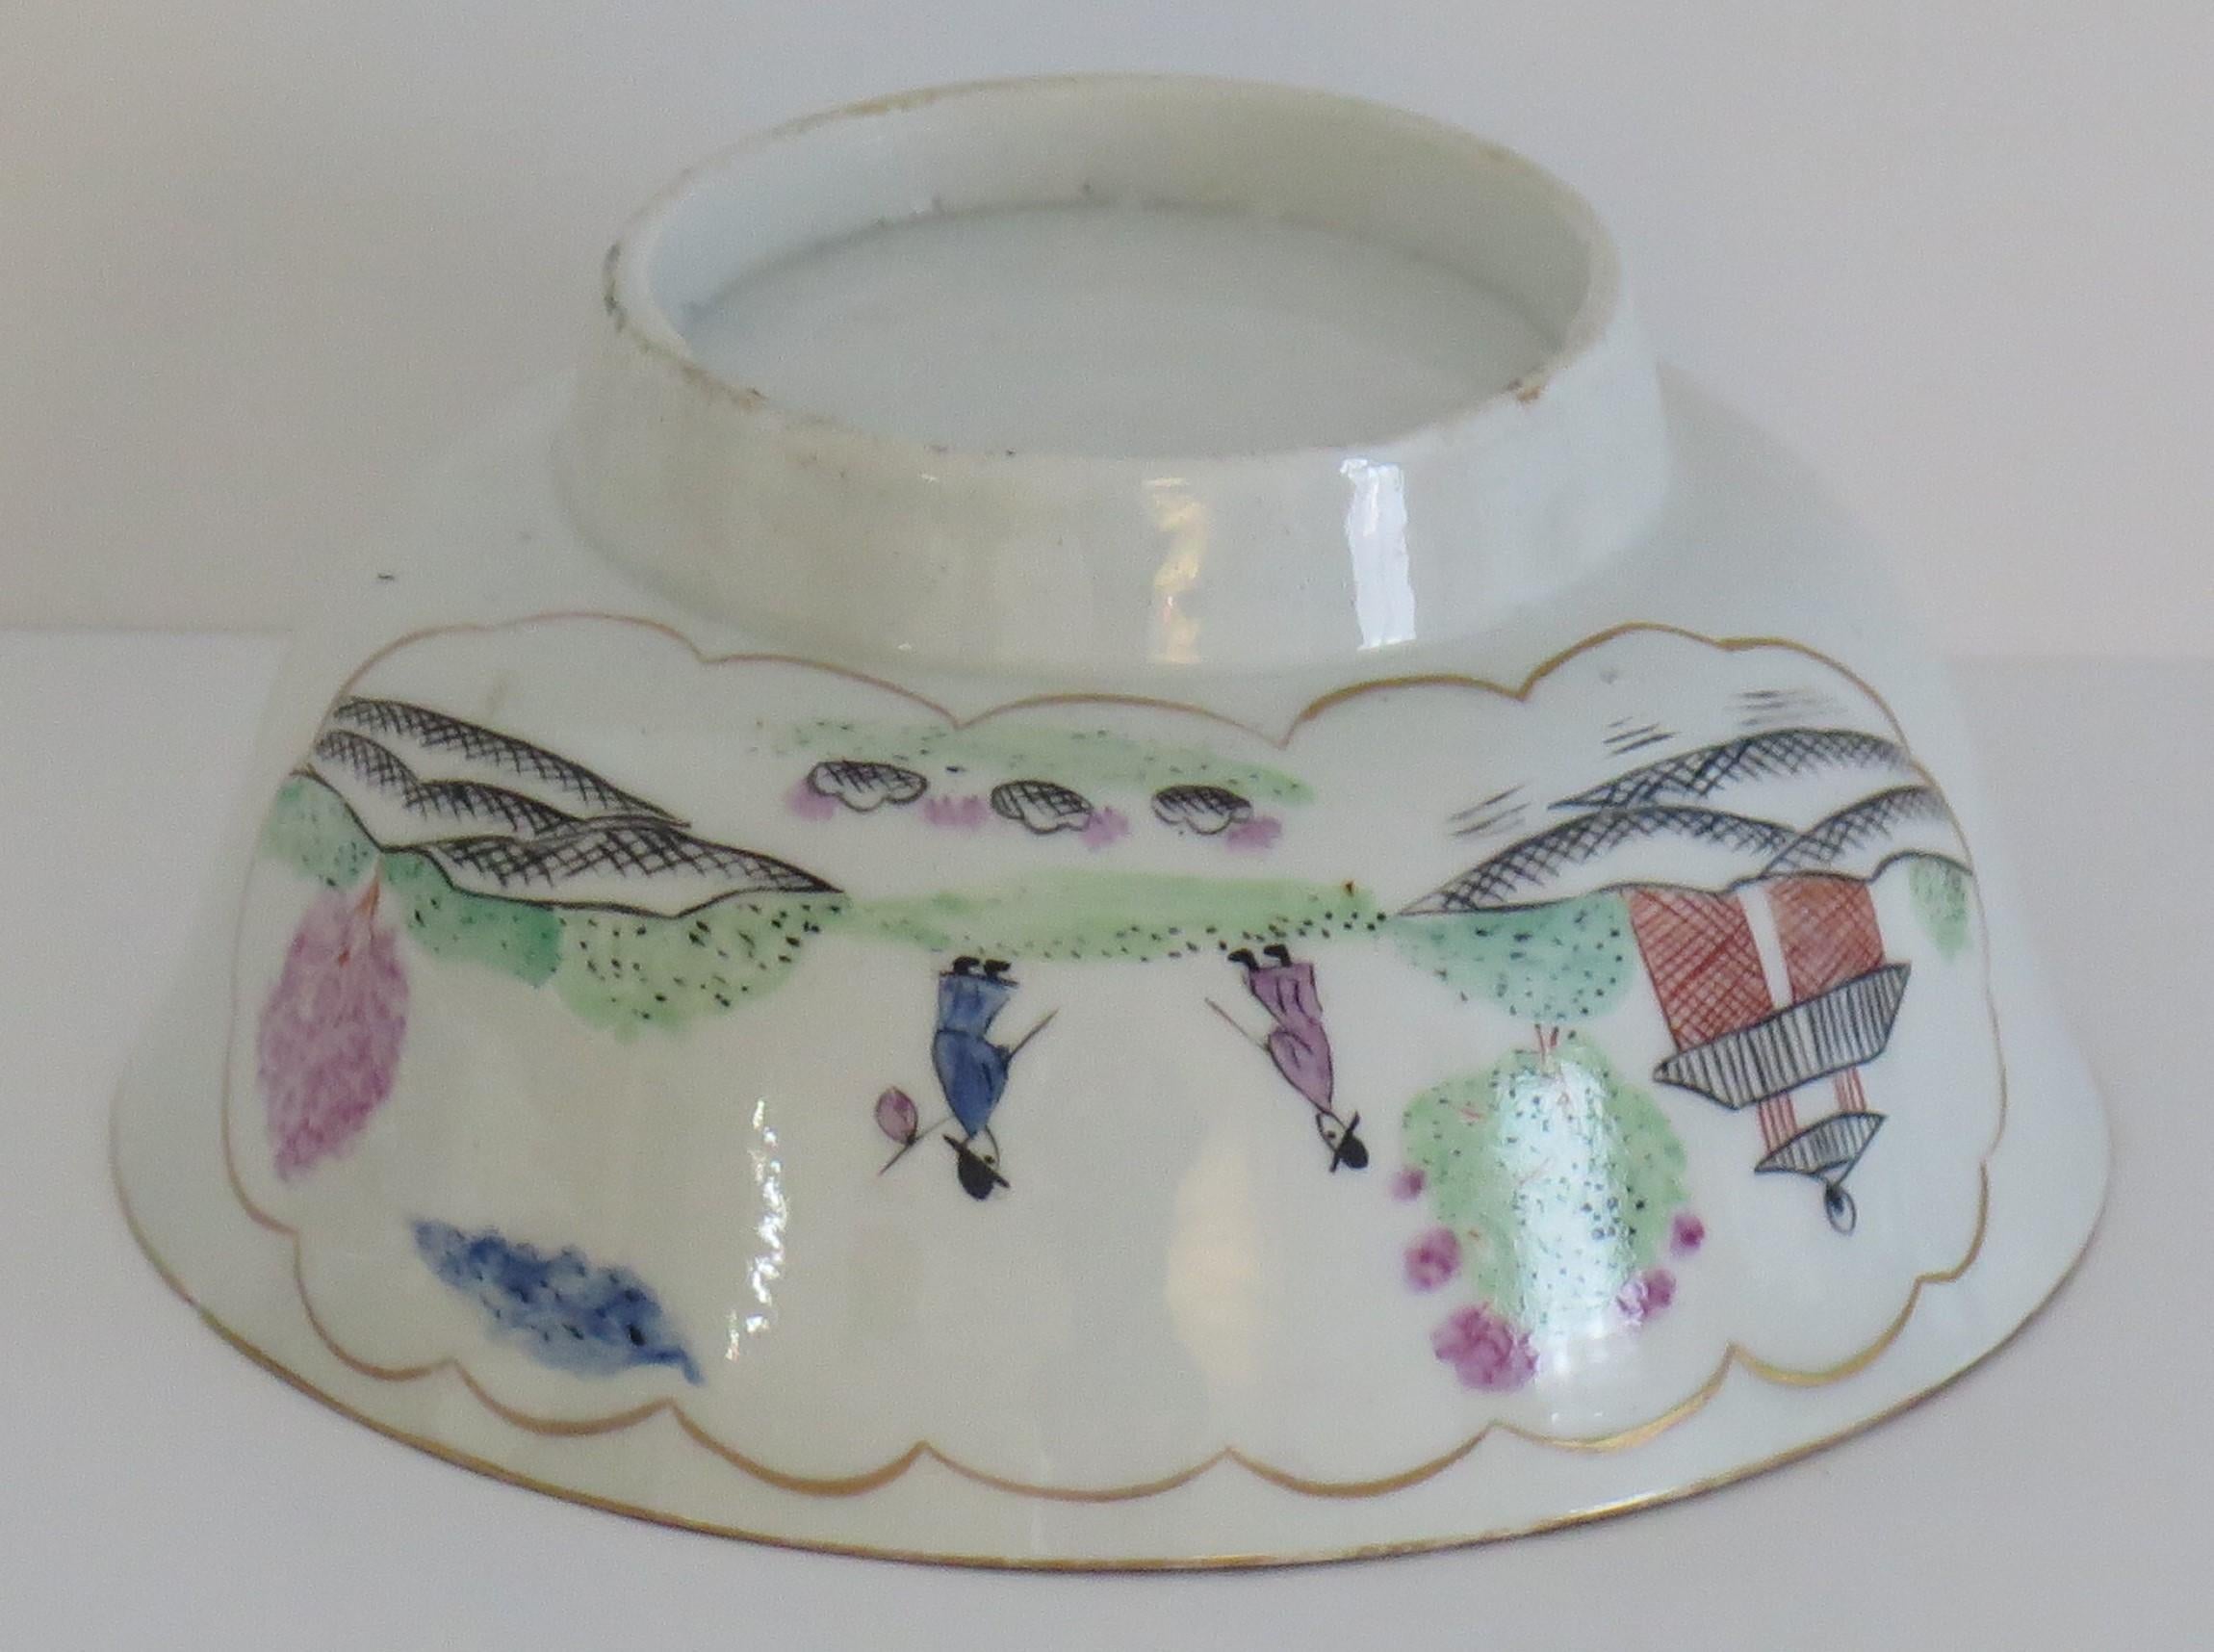 Chamberlains Worcester Porcelain Slop Bowl in Stag Hunt Pattern No.9, circa 1792 1